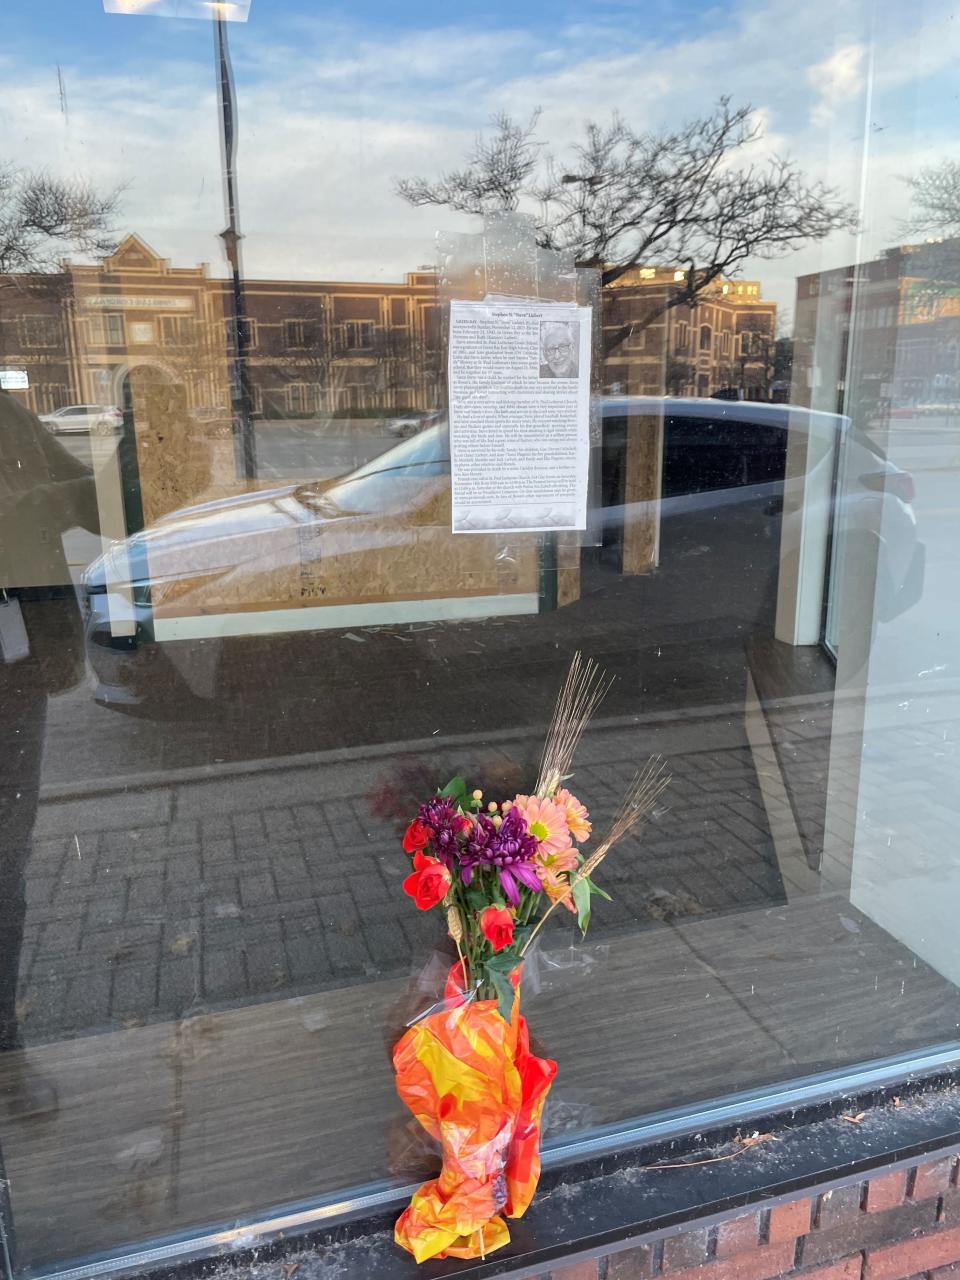 Steve Liebert, longtime owner of Bosse's News & Tobacco, died on Nov. 12. In the days after his passing, someone laid a bouquet of flowers and taped a copy of Liebert's obituary at the window of Bosse's longtime downtown Green Bay location at 220 Cherry St.